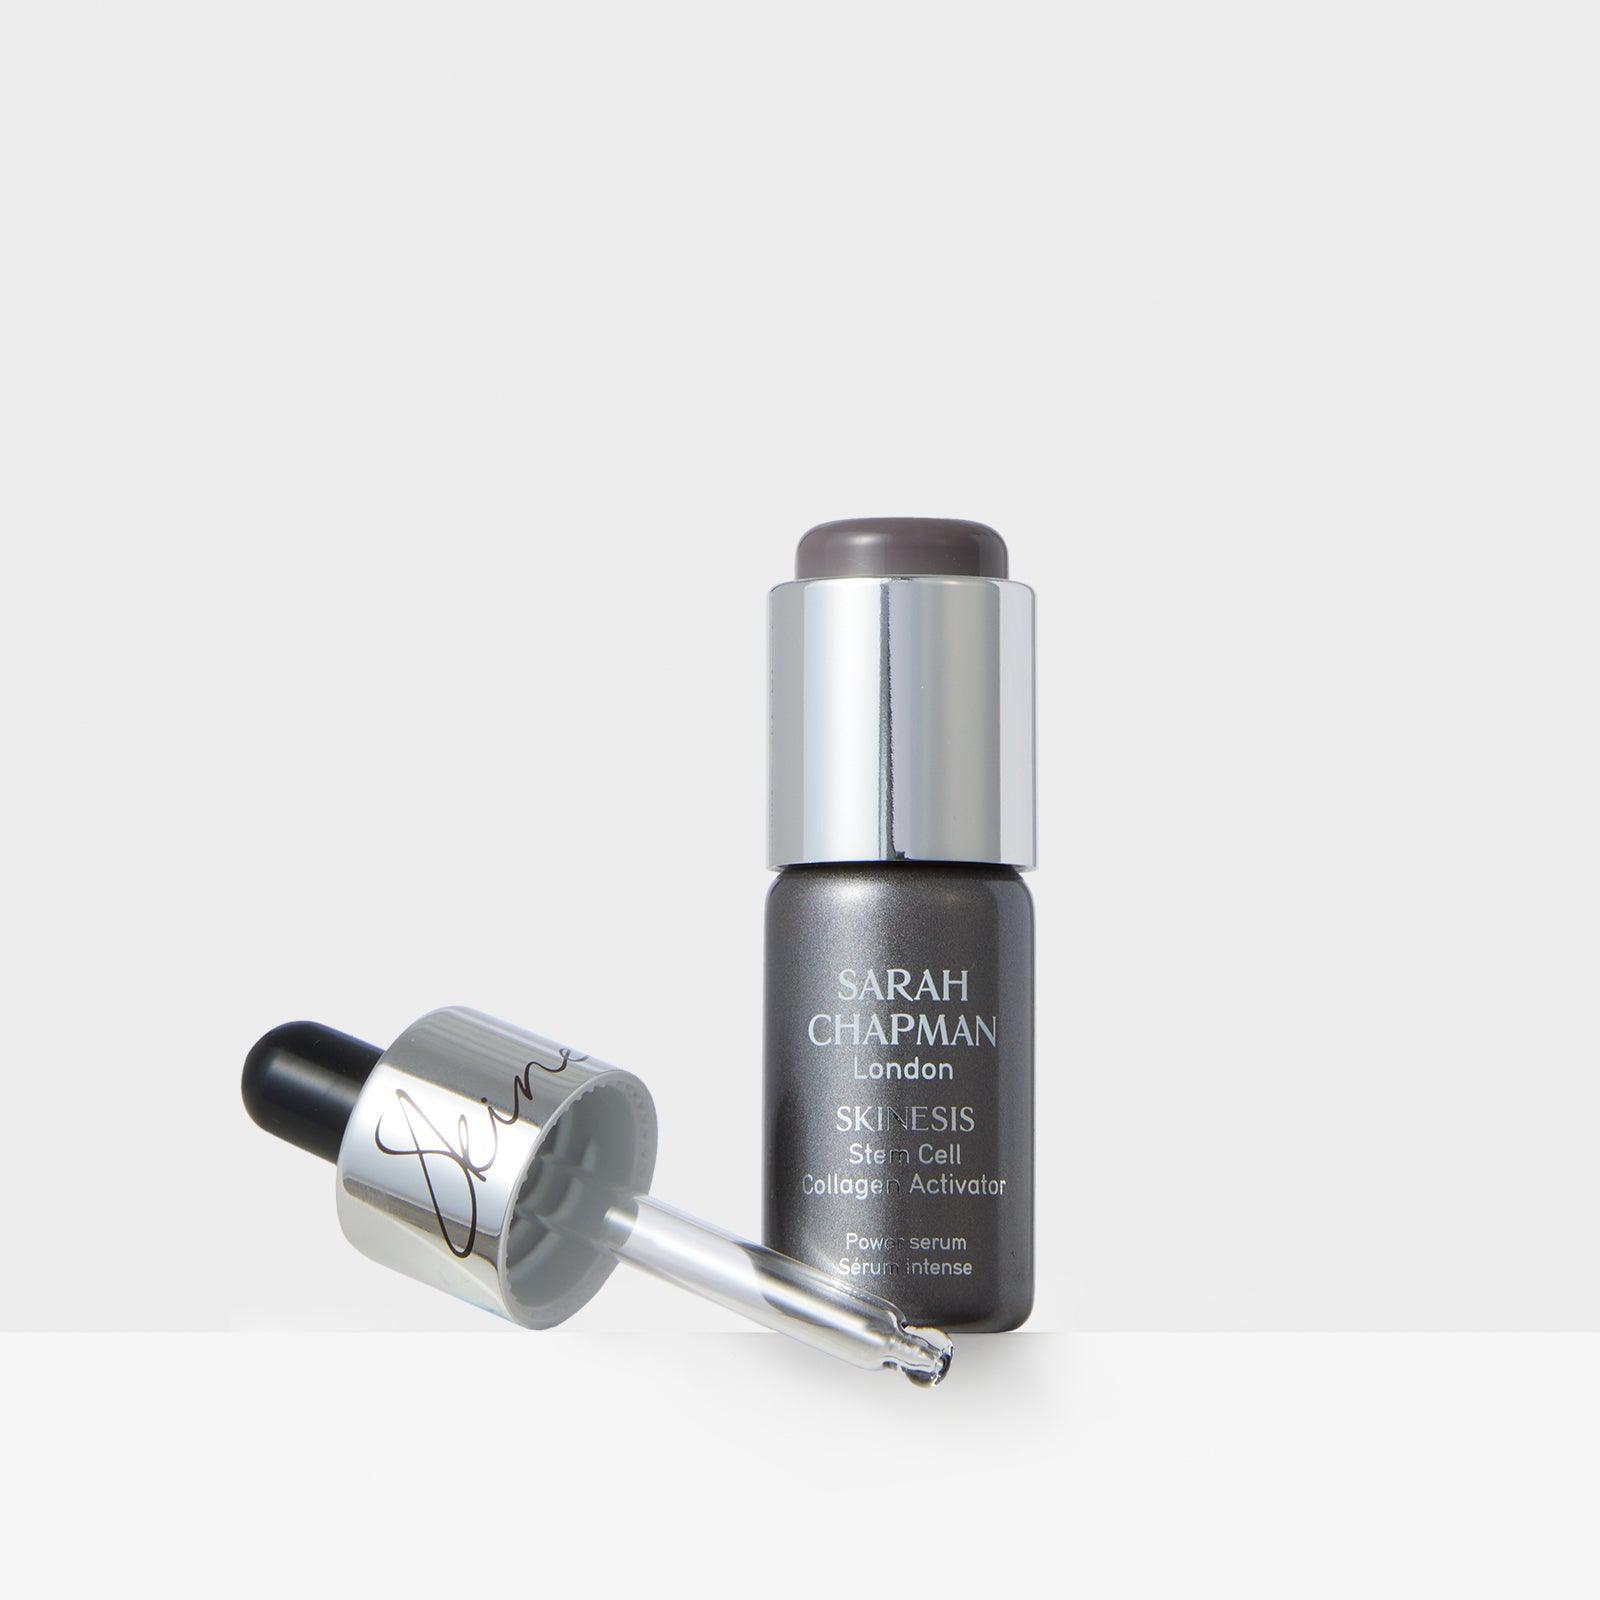 Stem Cell Collagen Activator face serum bottle with dropper lid- Sarah Chapman Skinesis